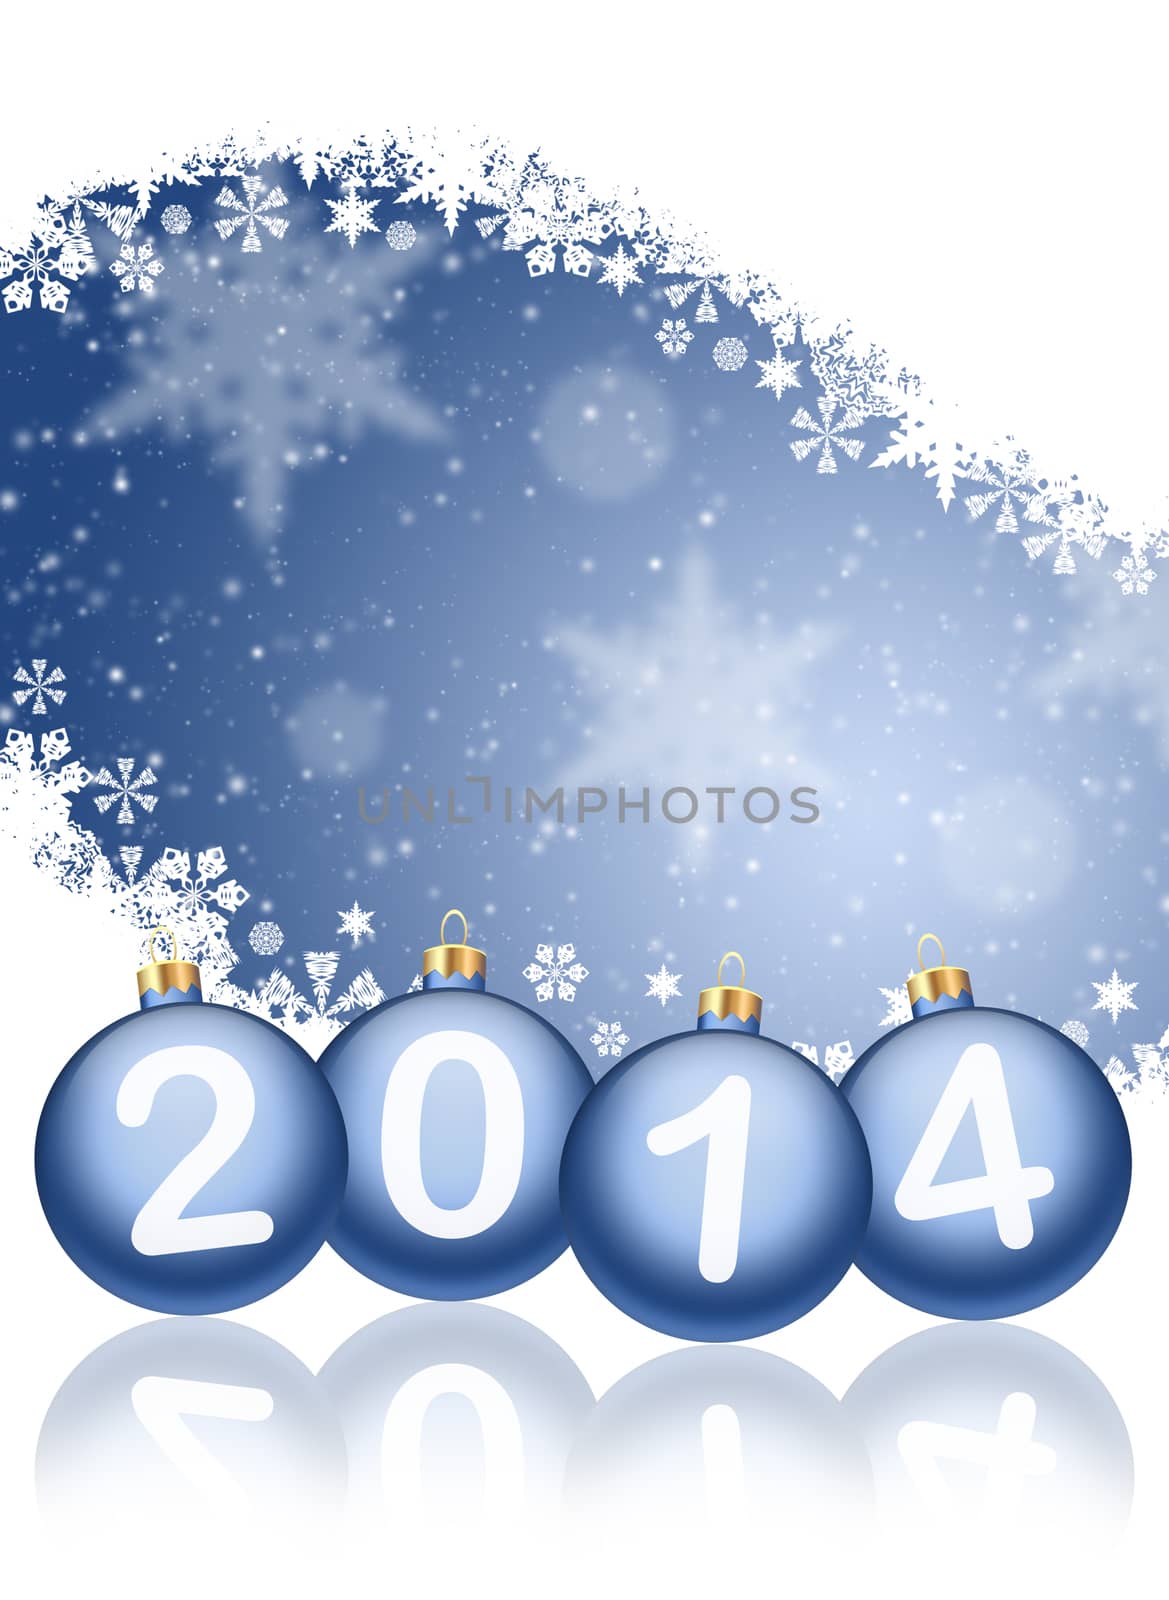 Christmas background. 2014 with reflections and snowflakes on a blue background